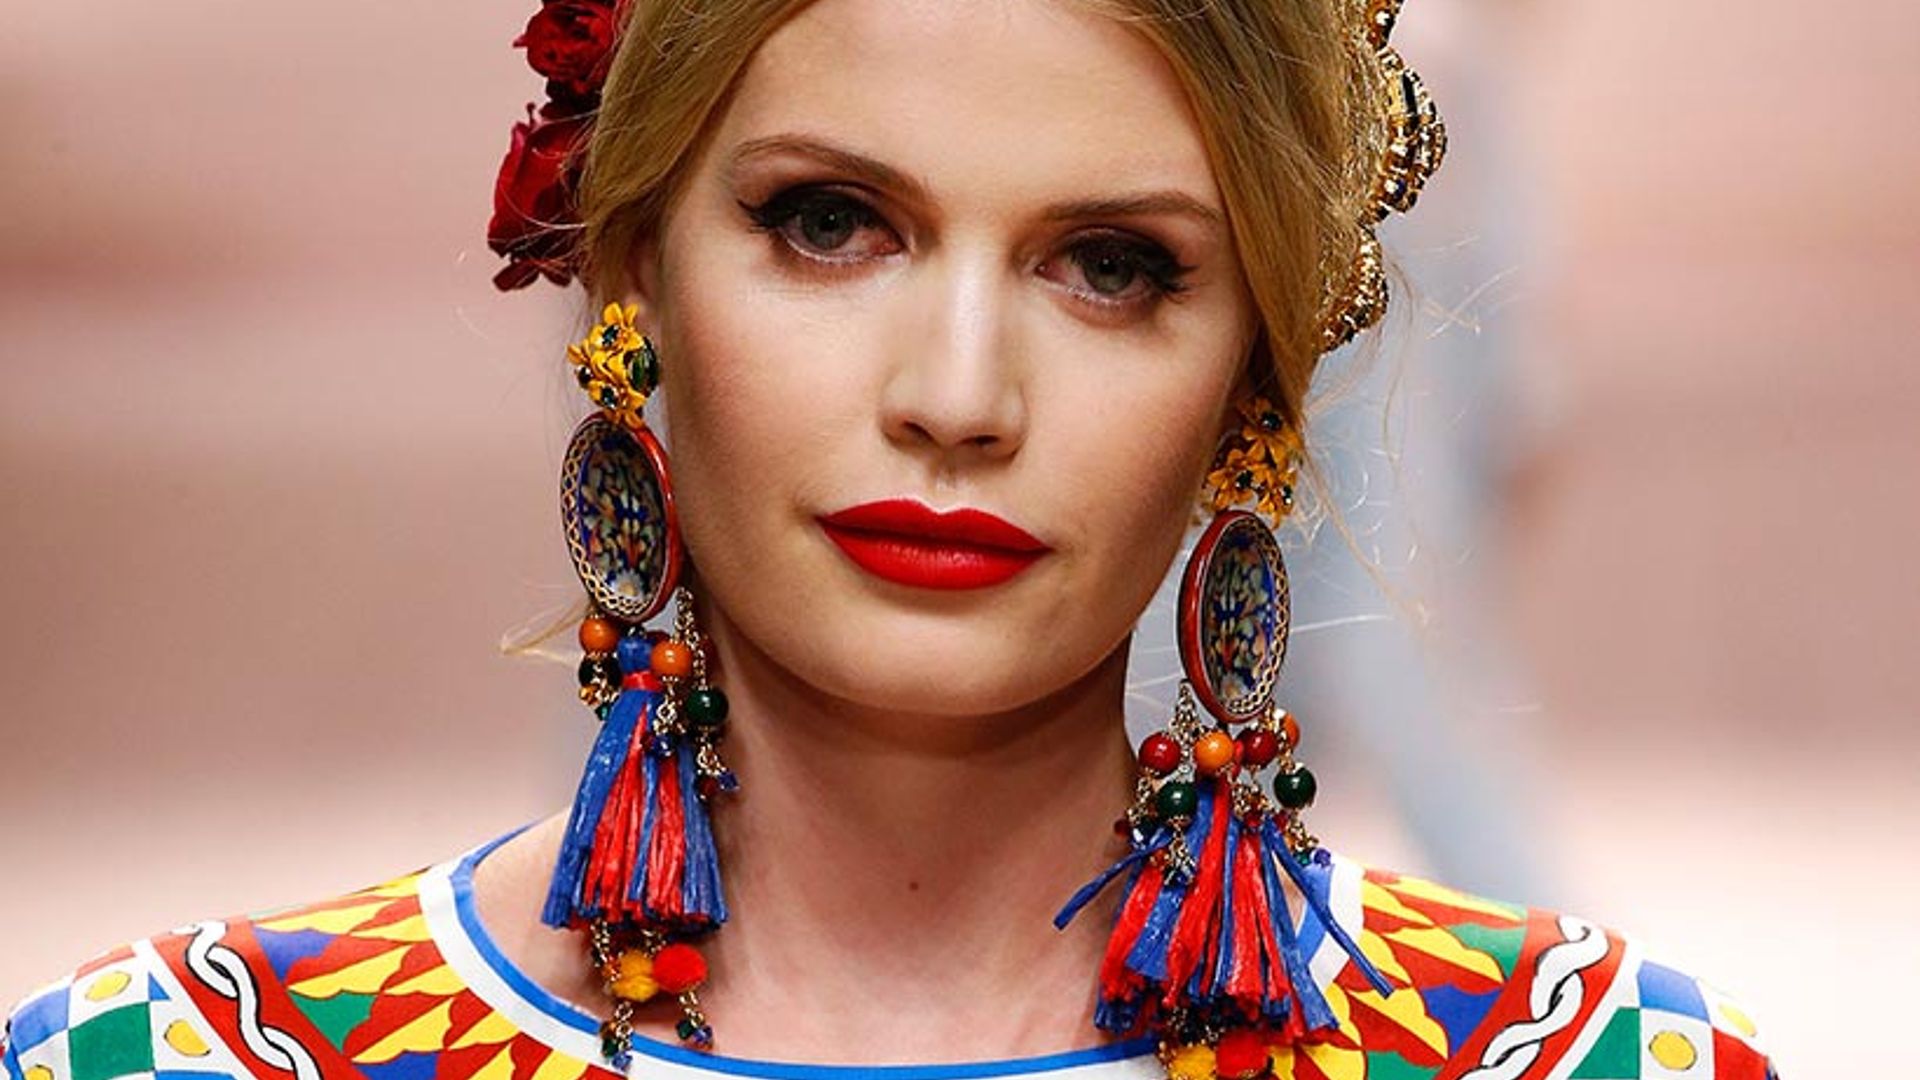 Wait til you see the pictures of Lady Kitty Spencer taking over the catwalk - she looks insane